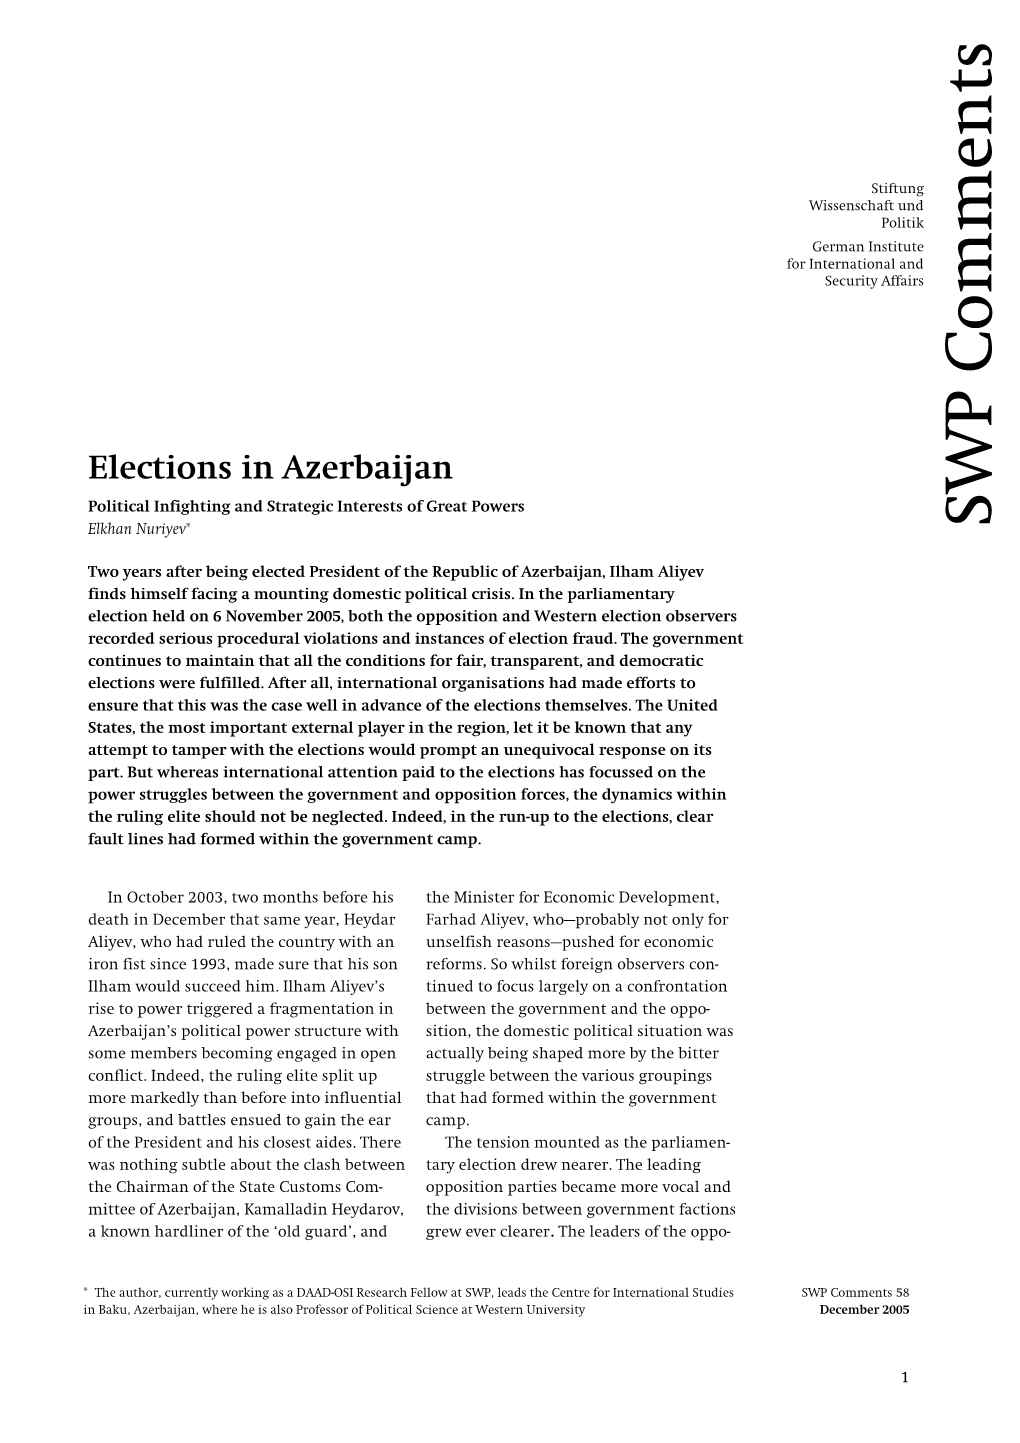 Elections in Azerbaijan Political Infighting and Strategic Interests of Great Powers